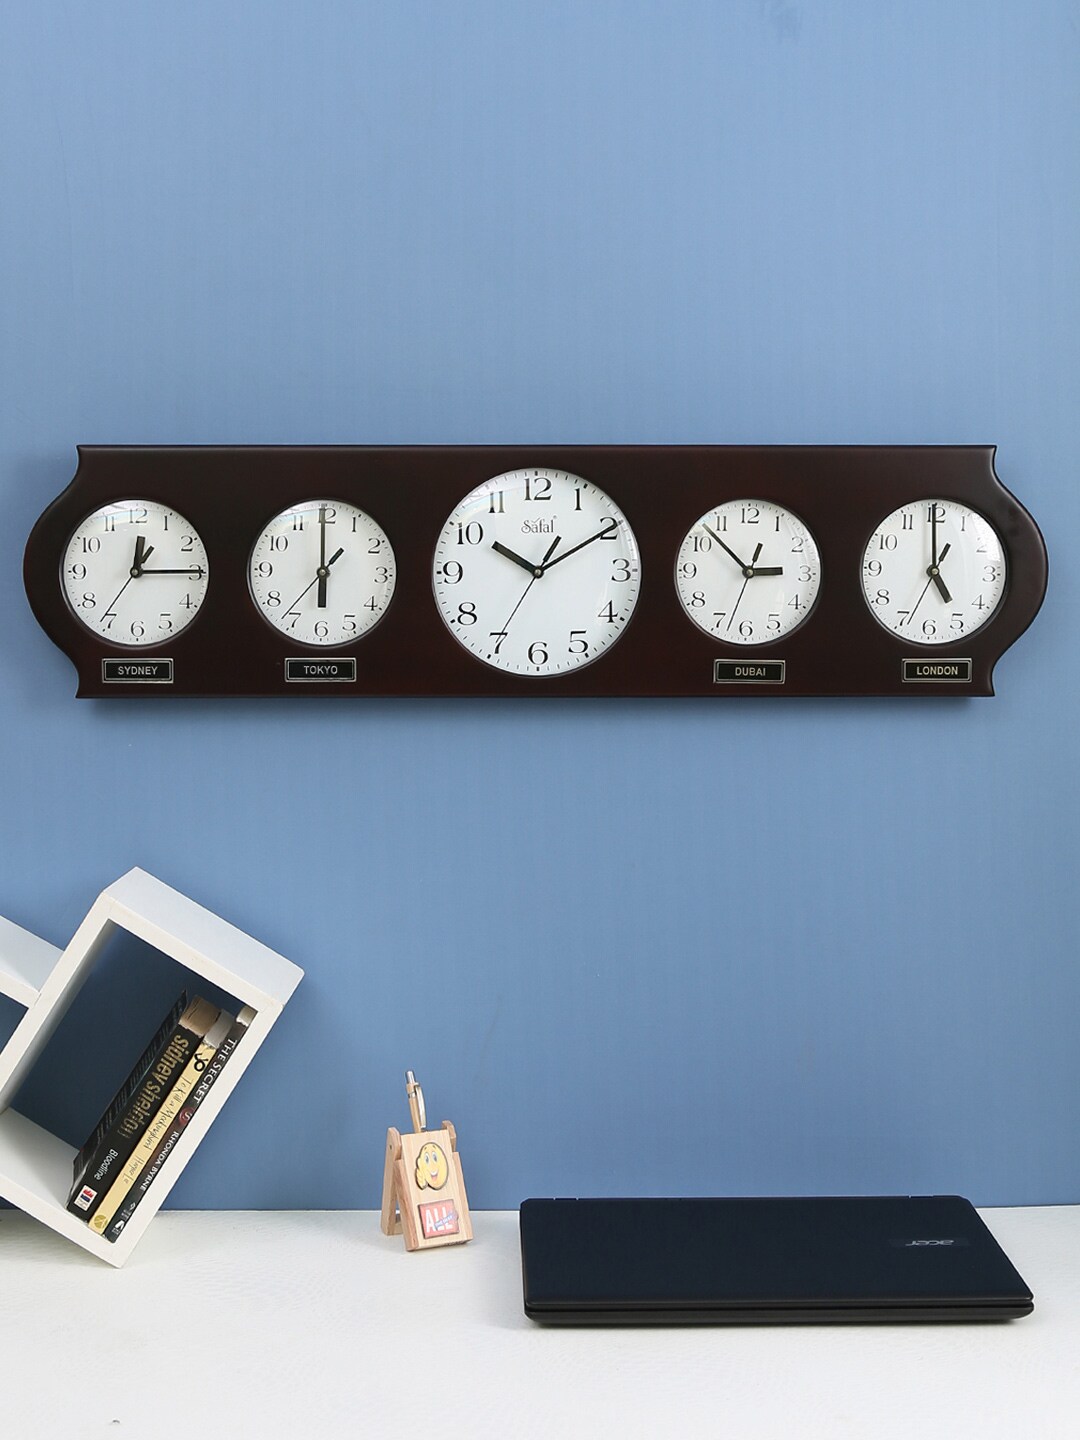 Safal White Dial Wooden 84 x 21 cm Analogue Wall Clock Price in India